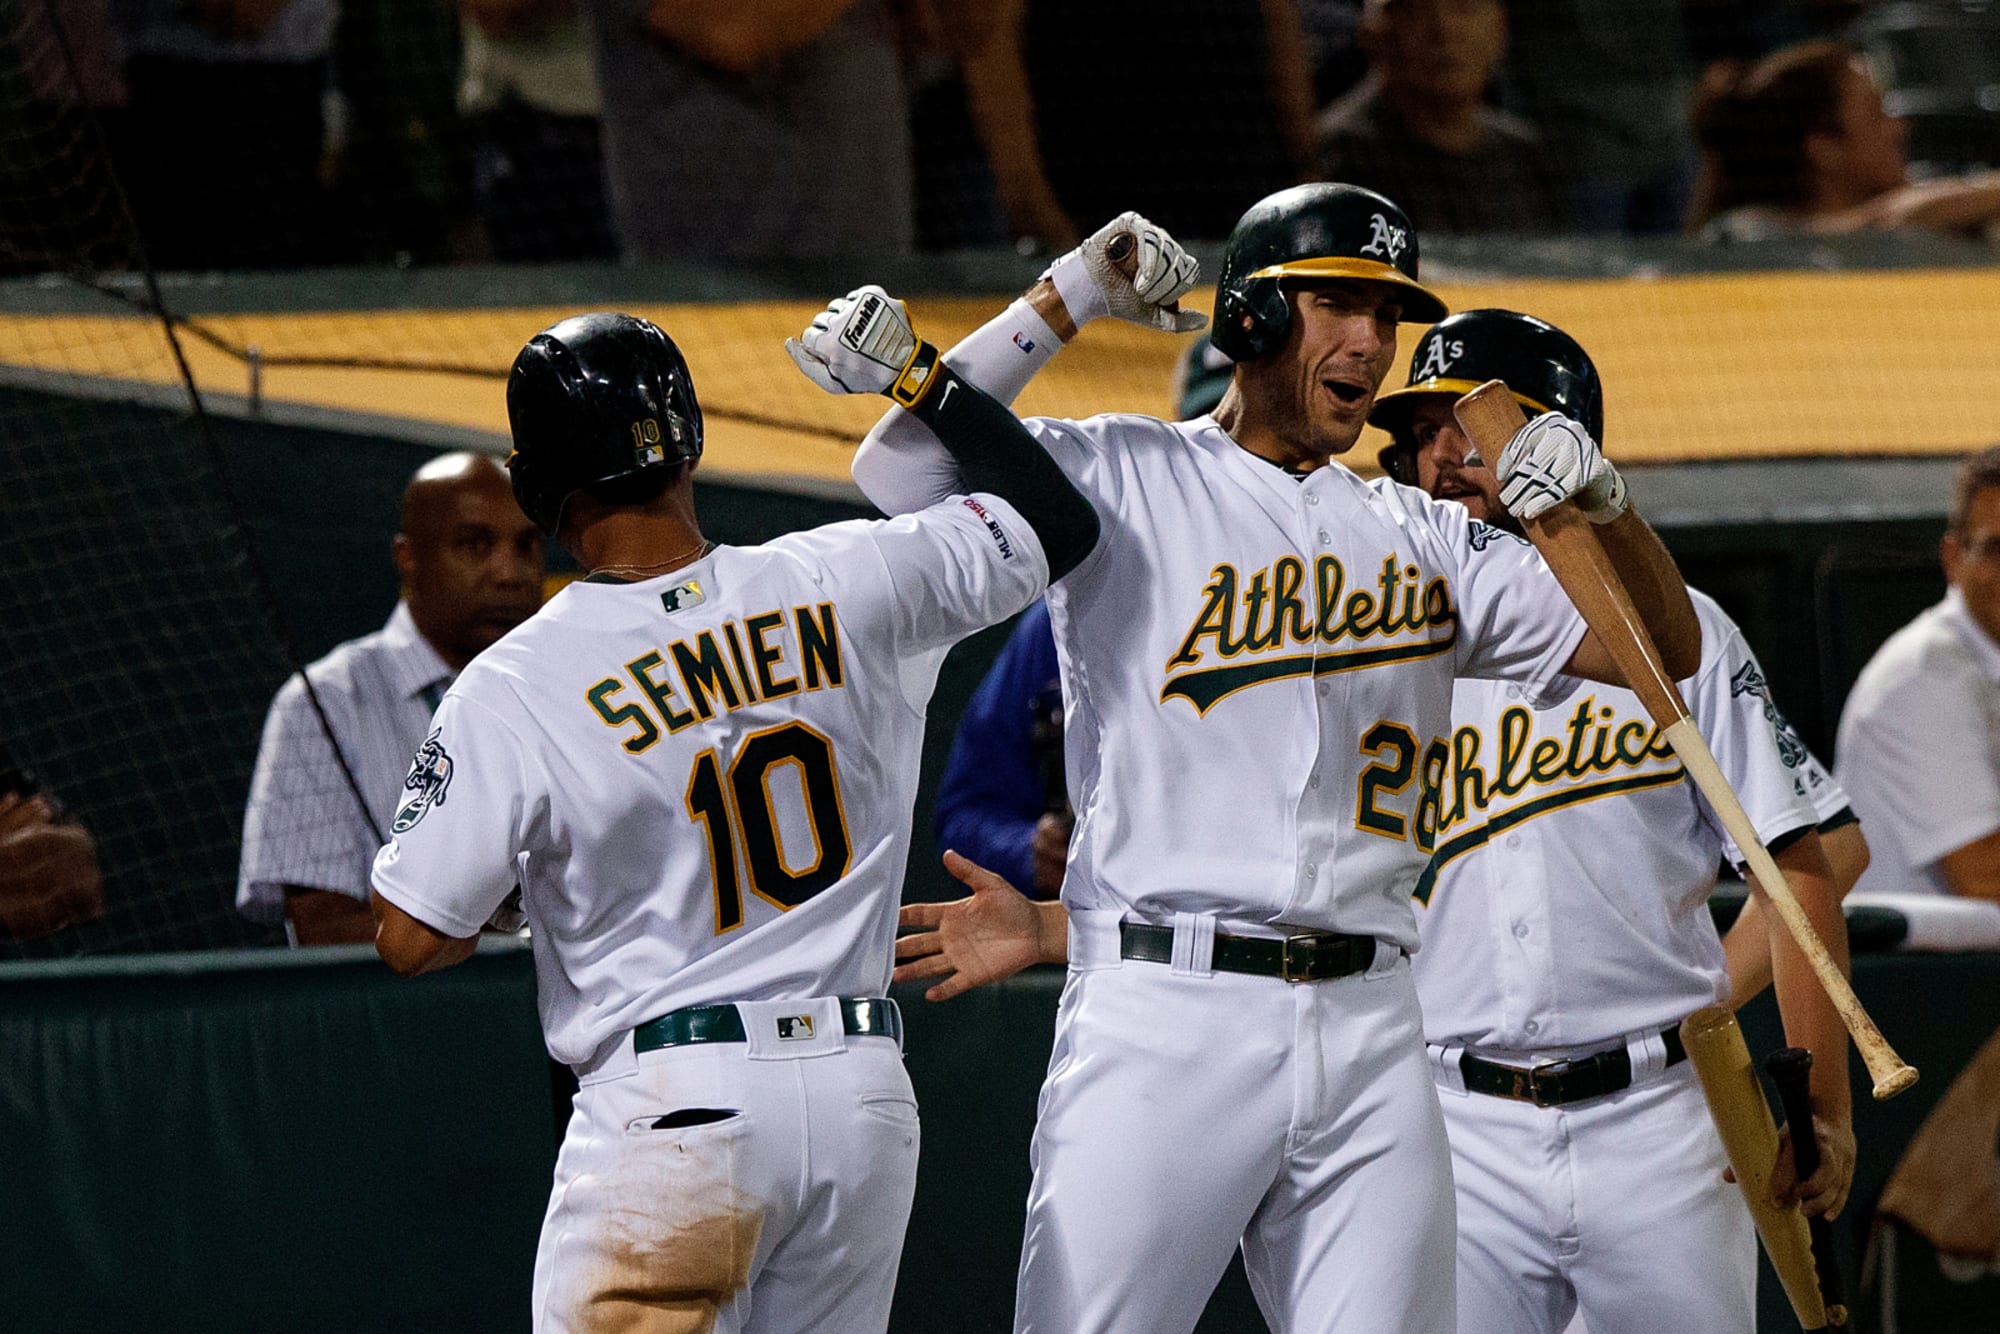 The Oakland Athletics are built for this kind of season